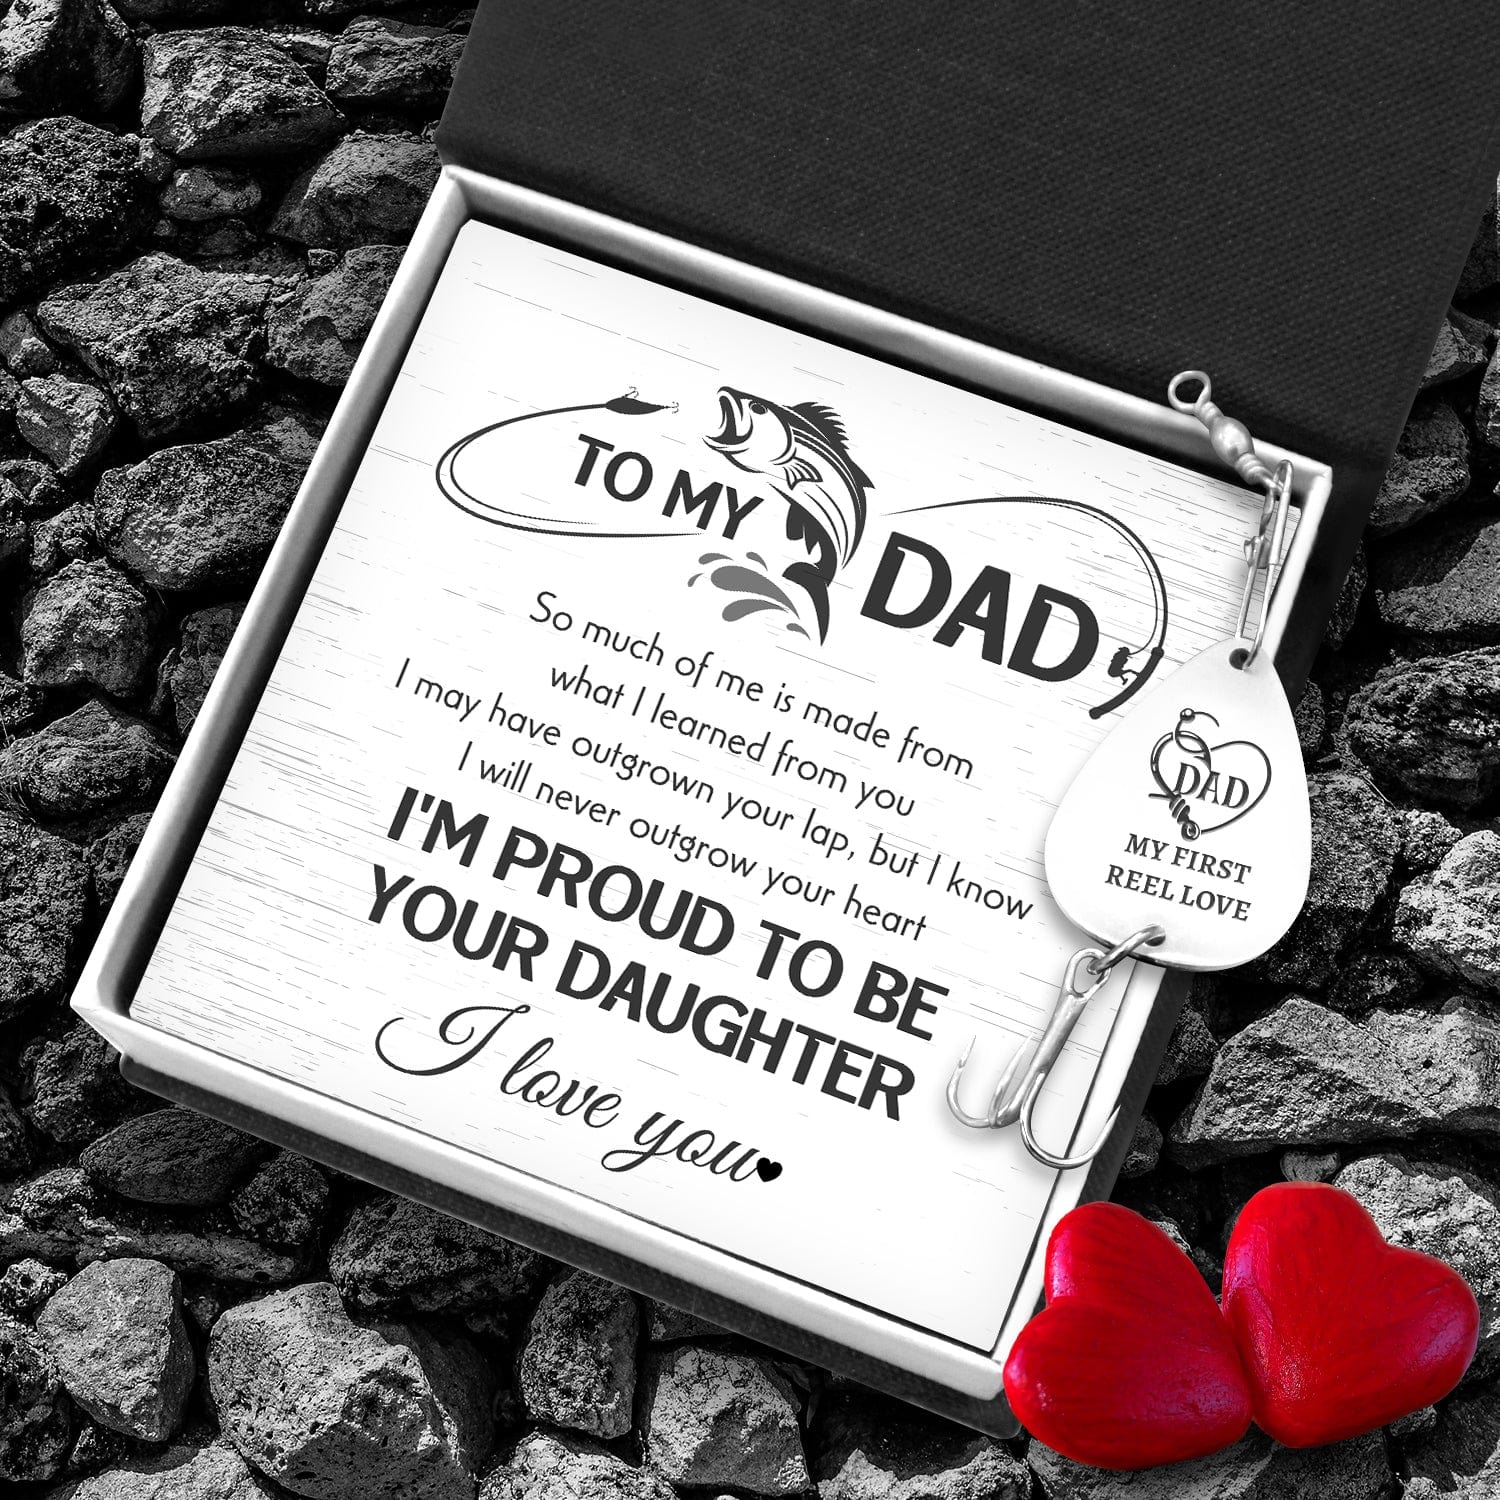 Engraved Fishing Hook - Fishing - To My Dad - I Will Never Outgrow Your Heart - Gfa18028